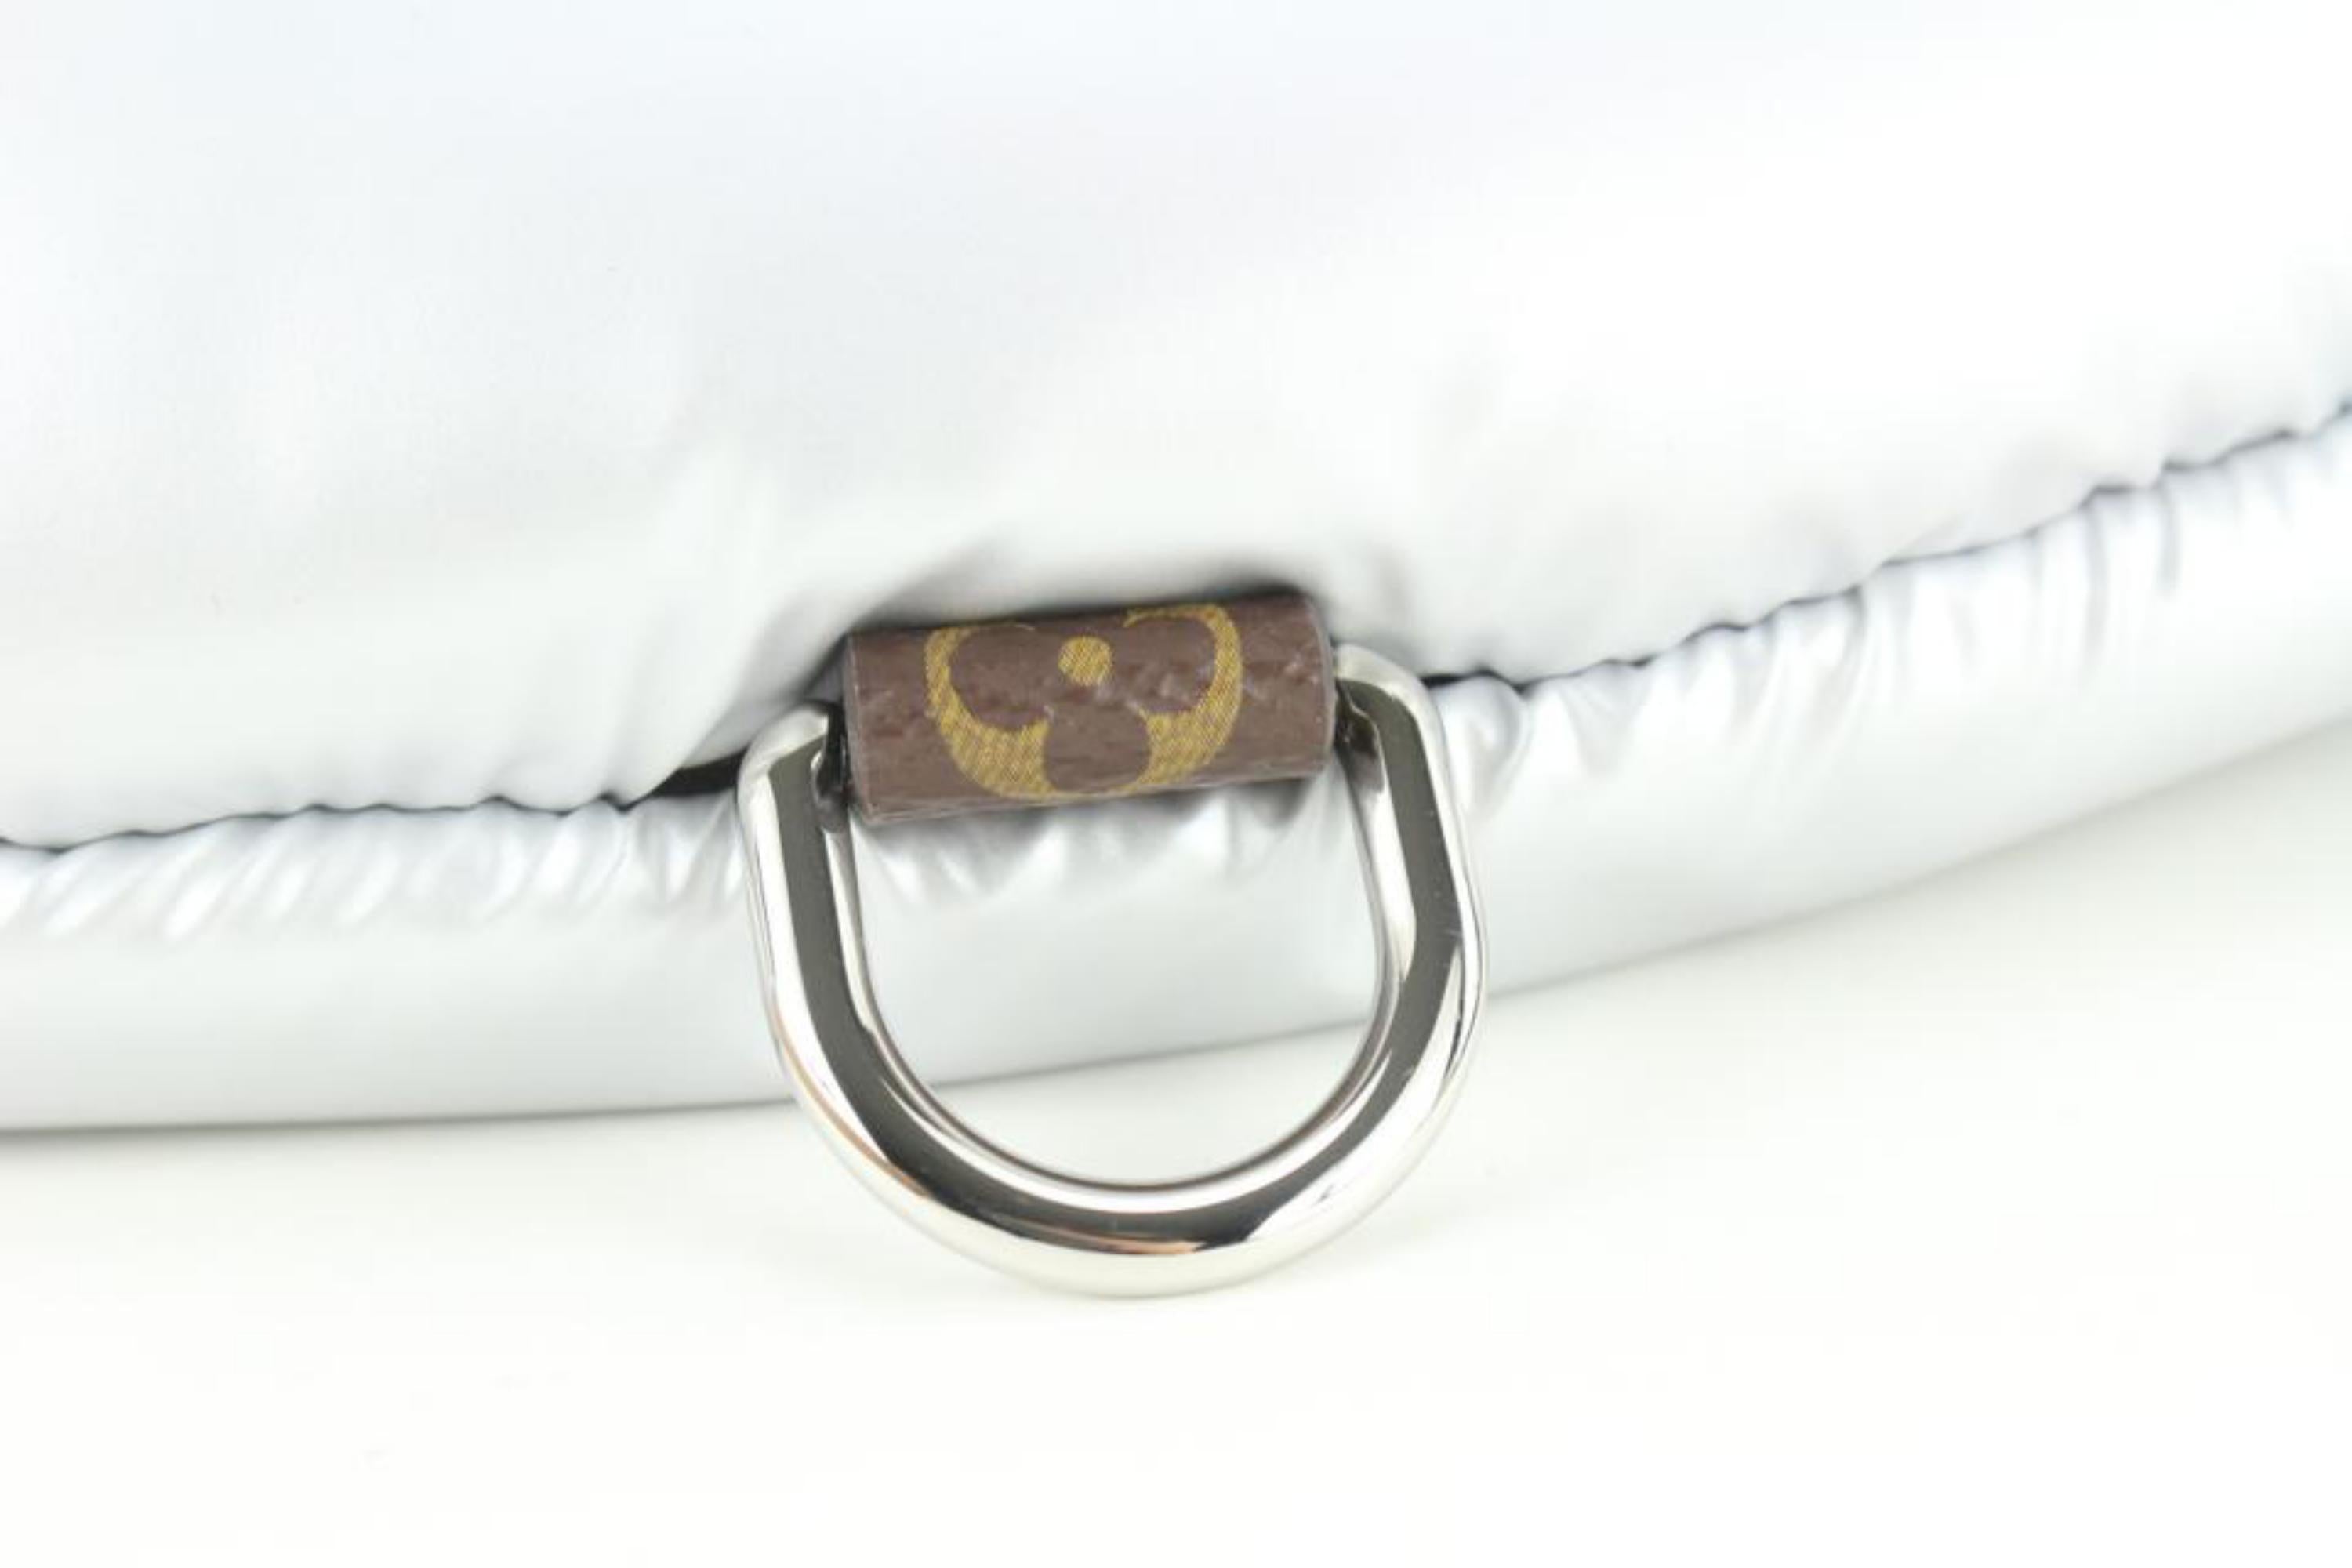 Louis Vuitton Silver Pillow Bumbag - New in Dust Bag - The